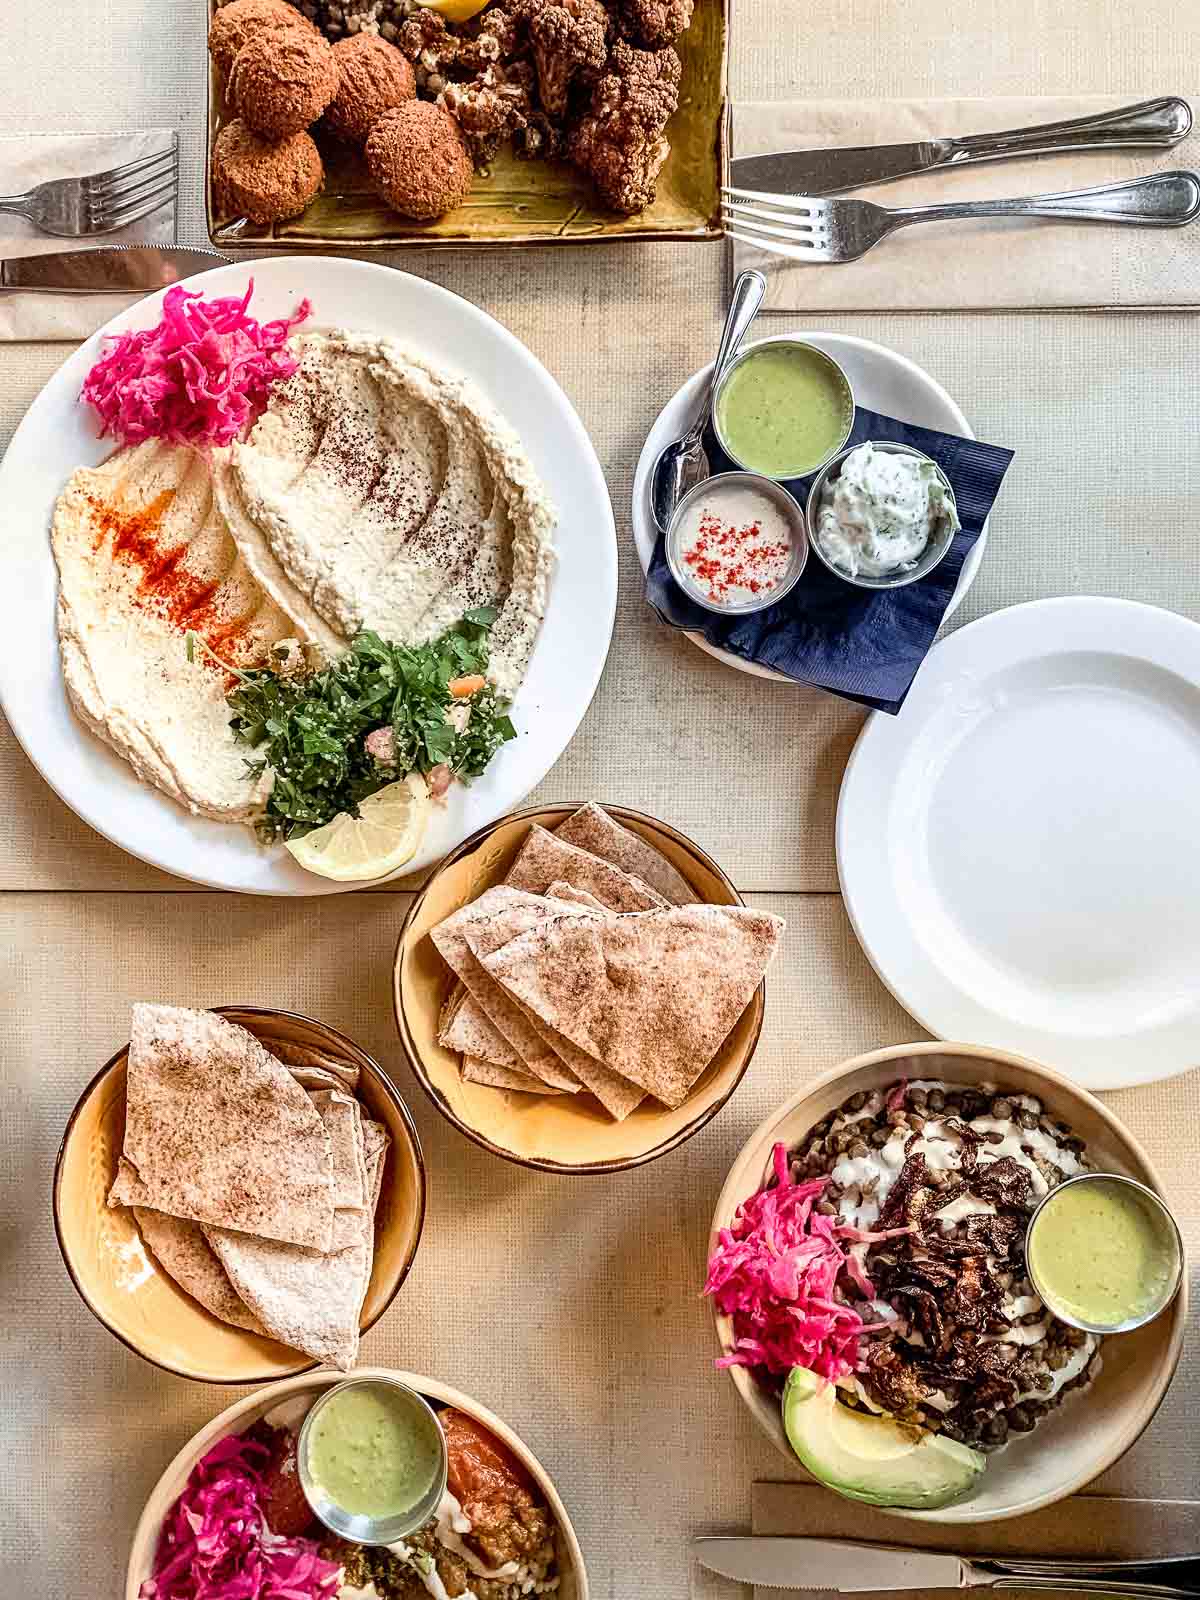 Table spread of vegan food from a local restaurant.